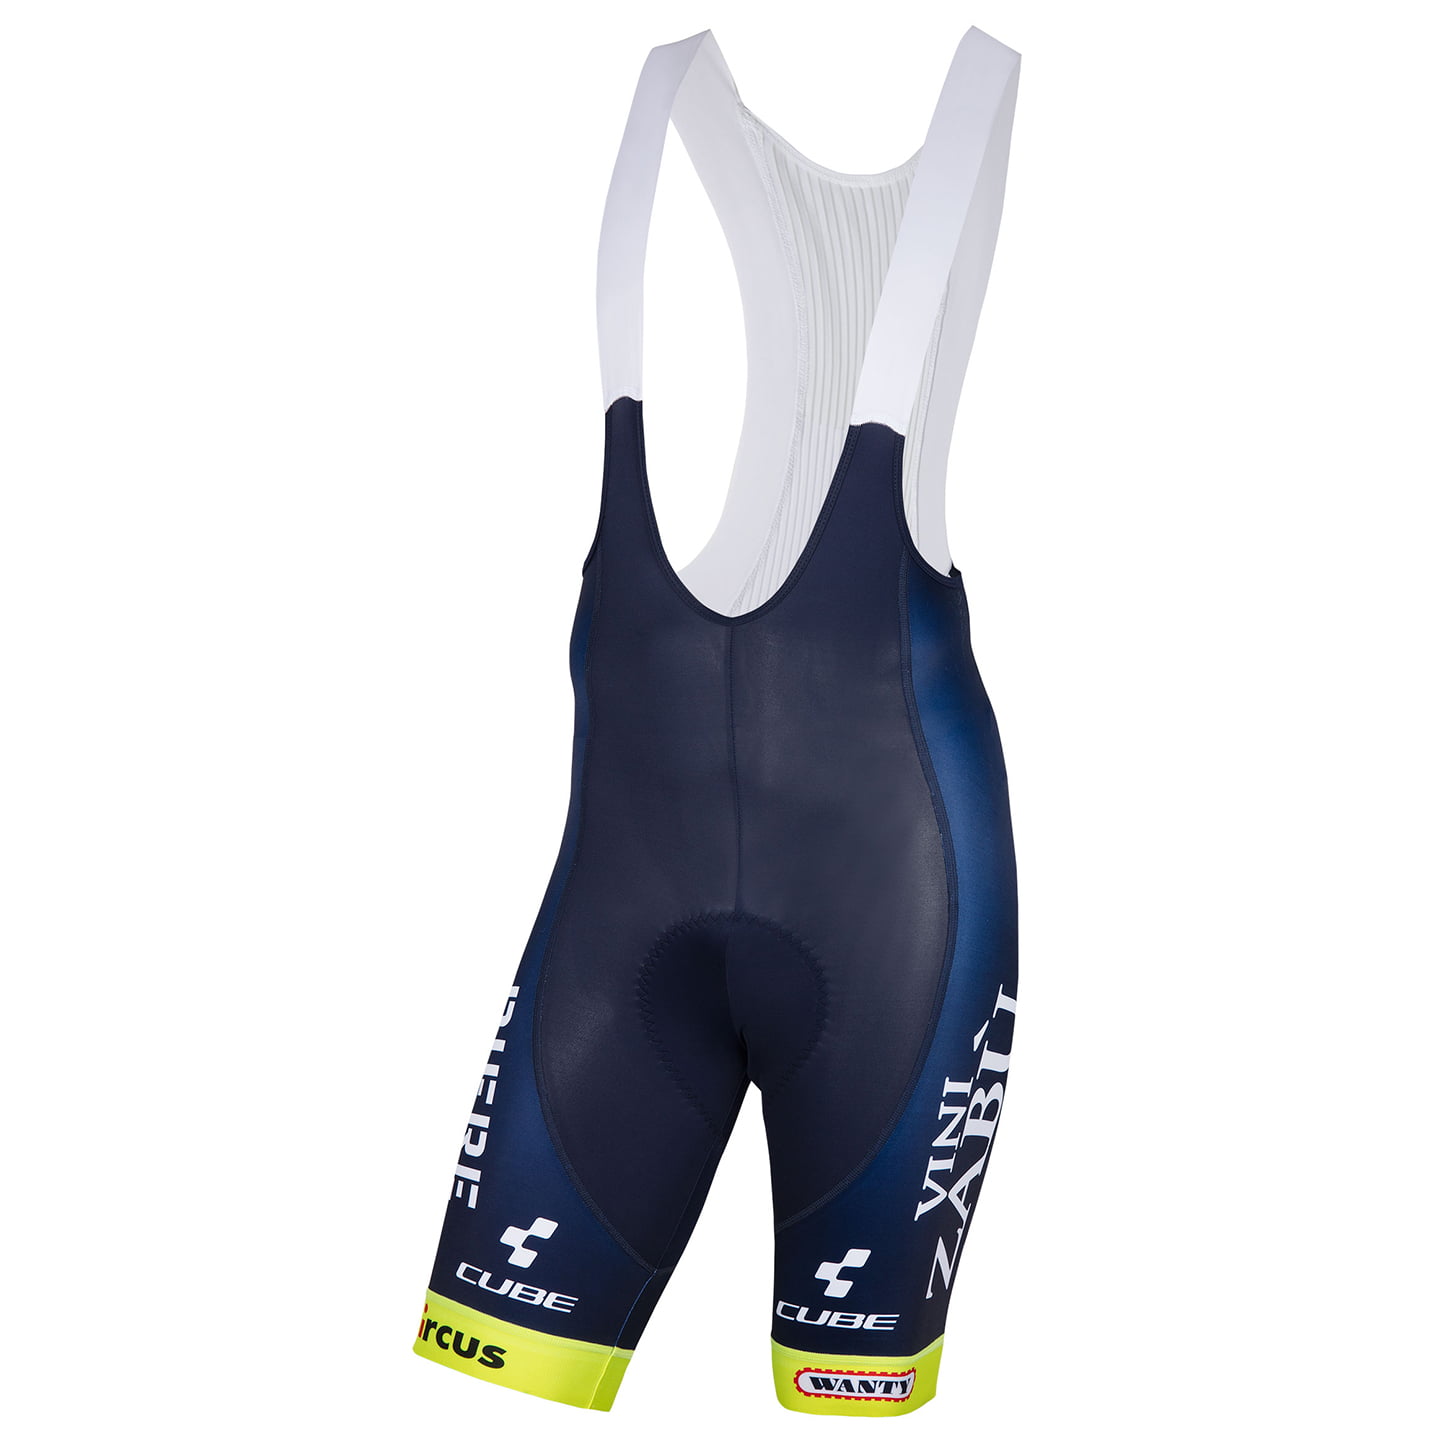 INTERMARCHE-CIRCUS-WANTY Race 2023 Bib Shorts, for men, size S, Cycle shorts, Cycling clothing